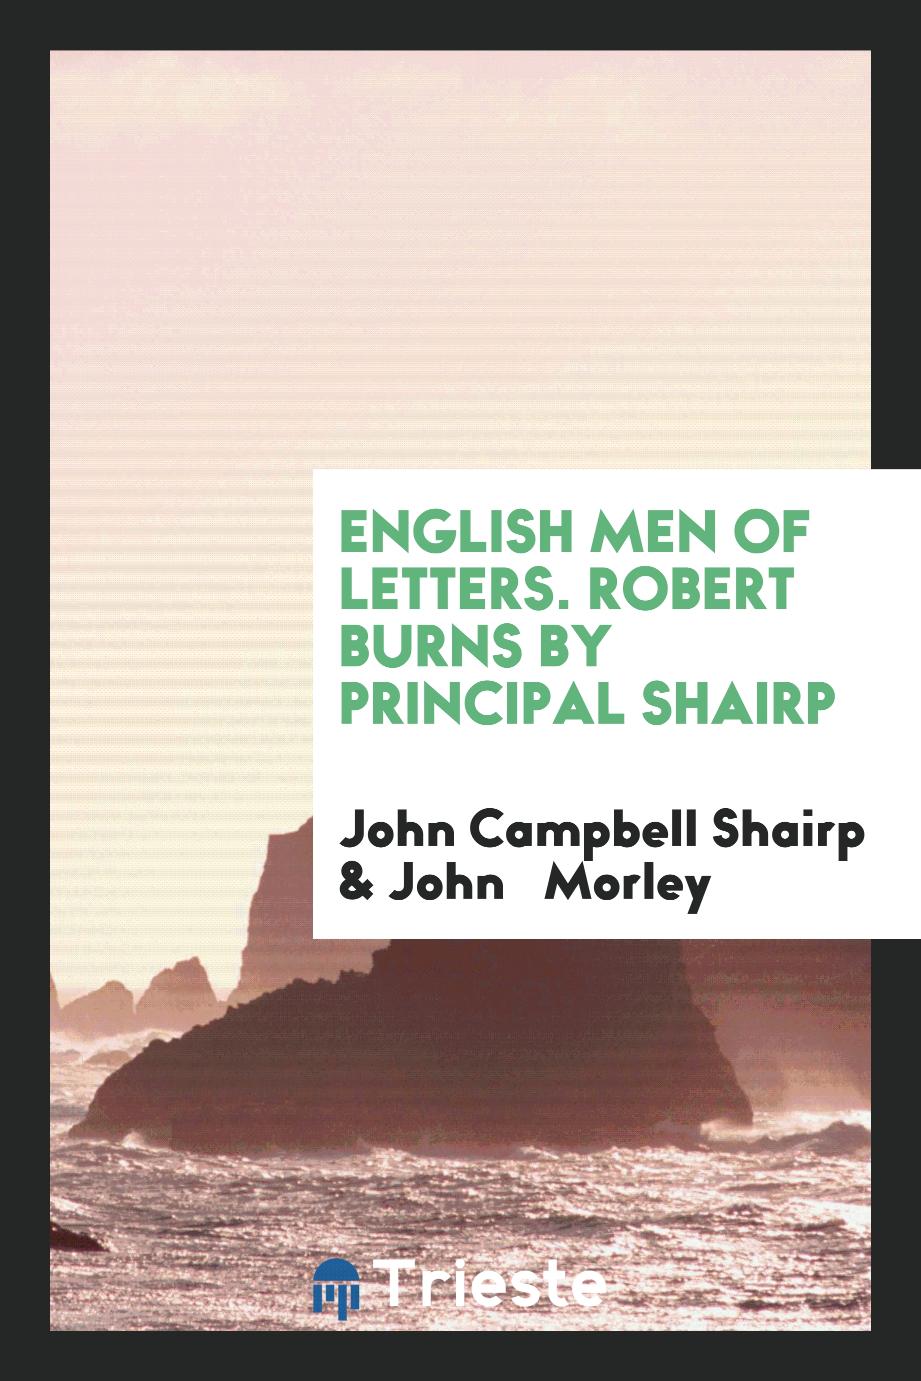 English Men of Letters. Robert Burns by Principal Shairp